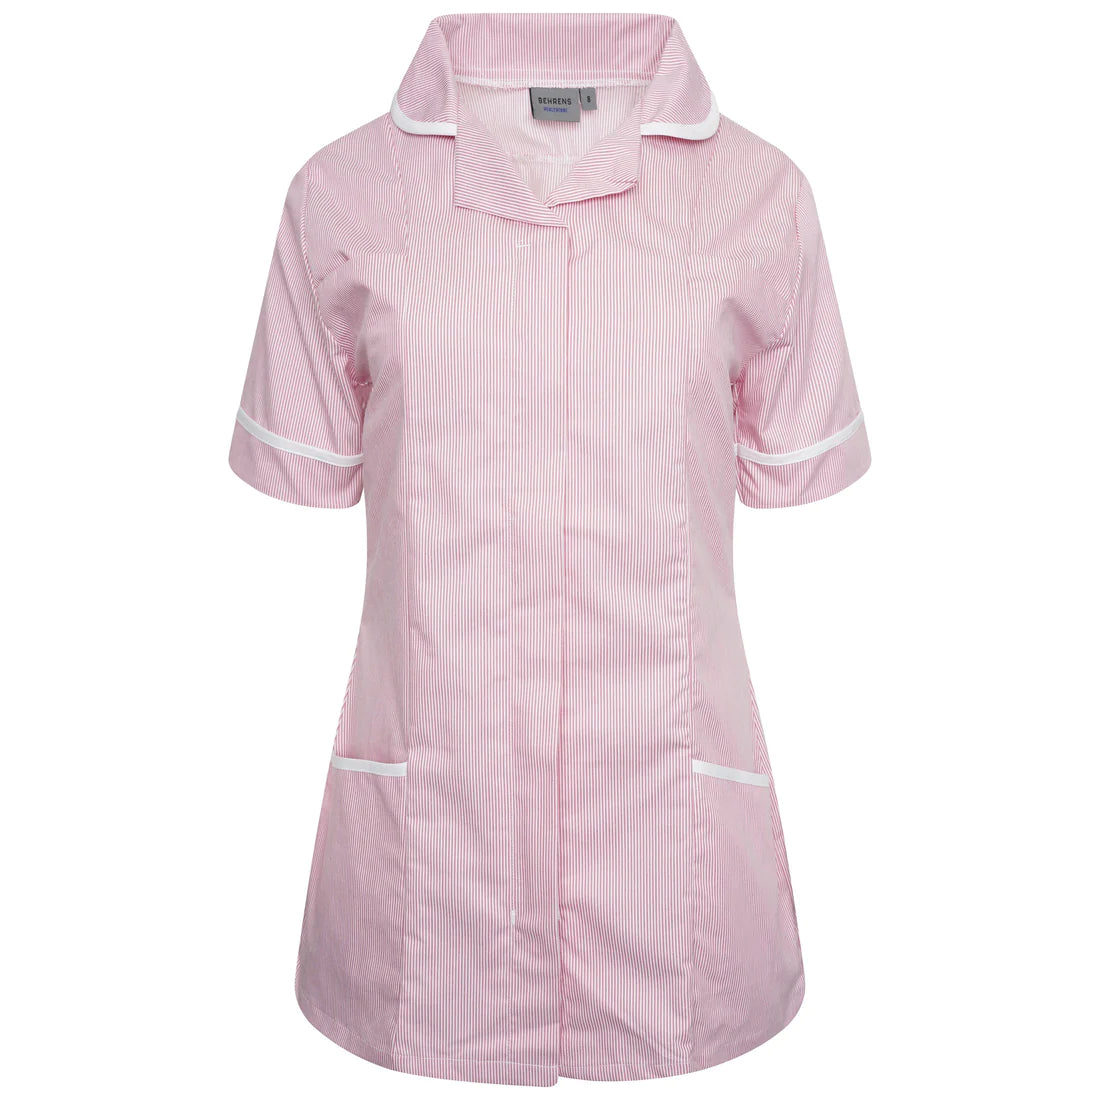 Pink/White stripe/White Contrast Ladies Tunic with Round Collar - NCLTPS